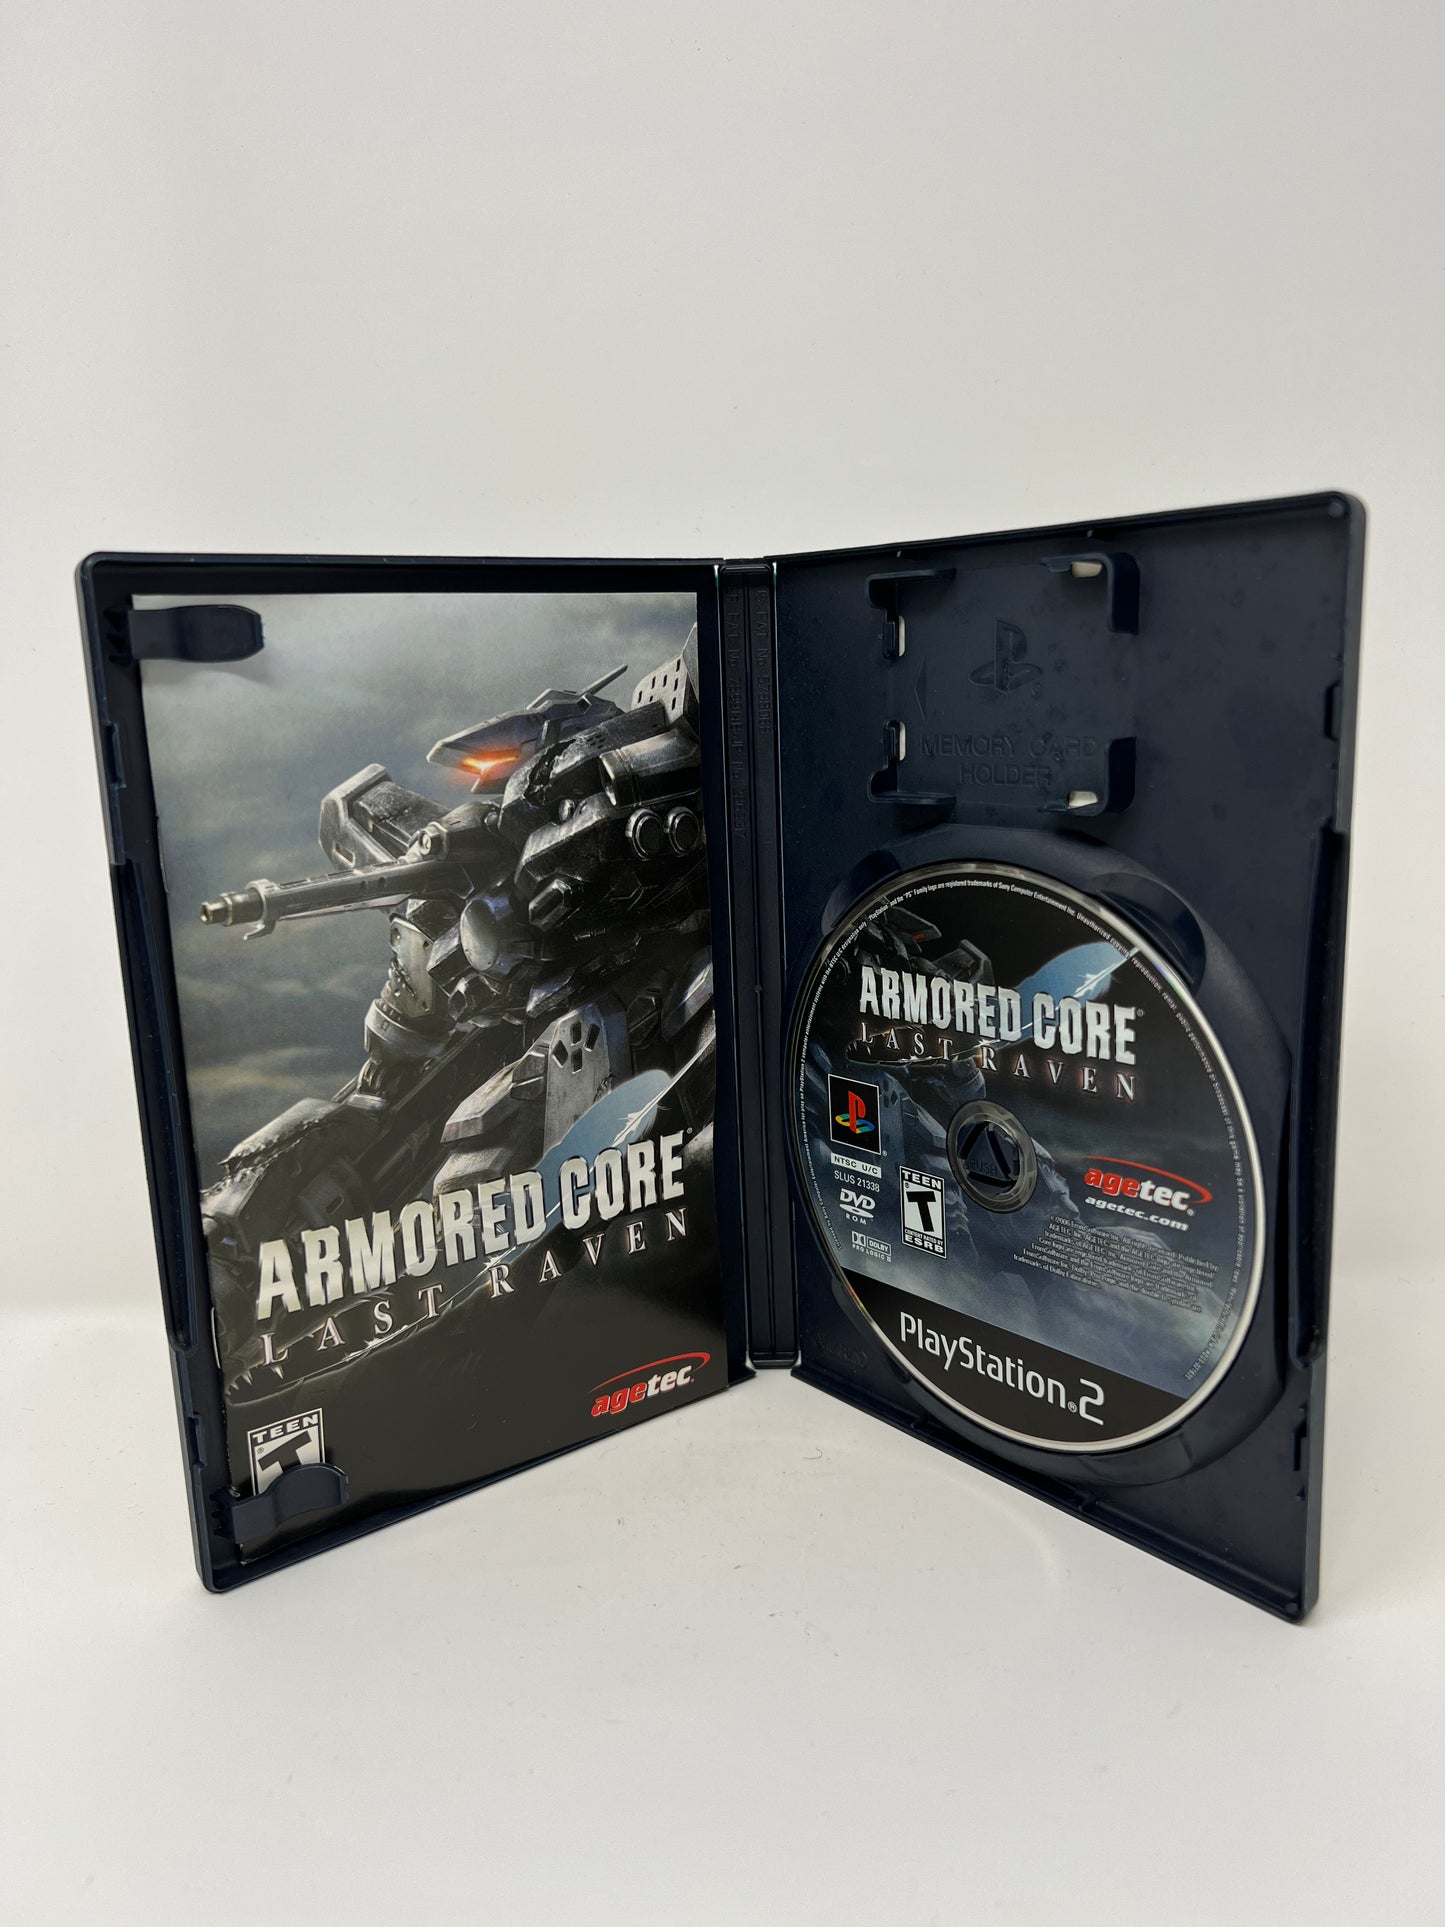 Armored Core Last Raven - PS2 Game - Used